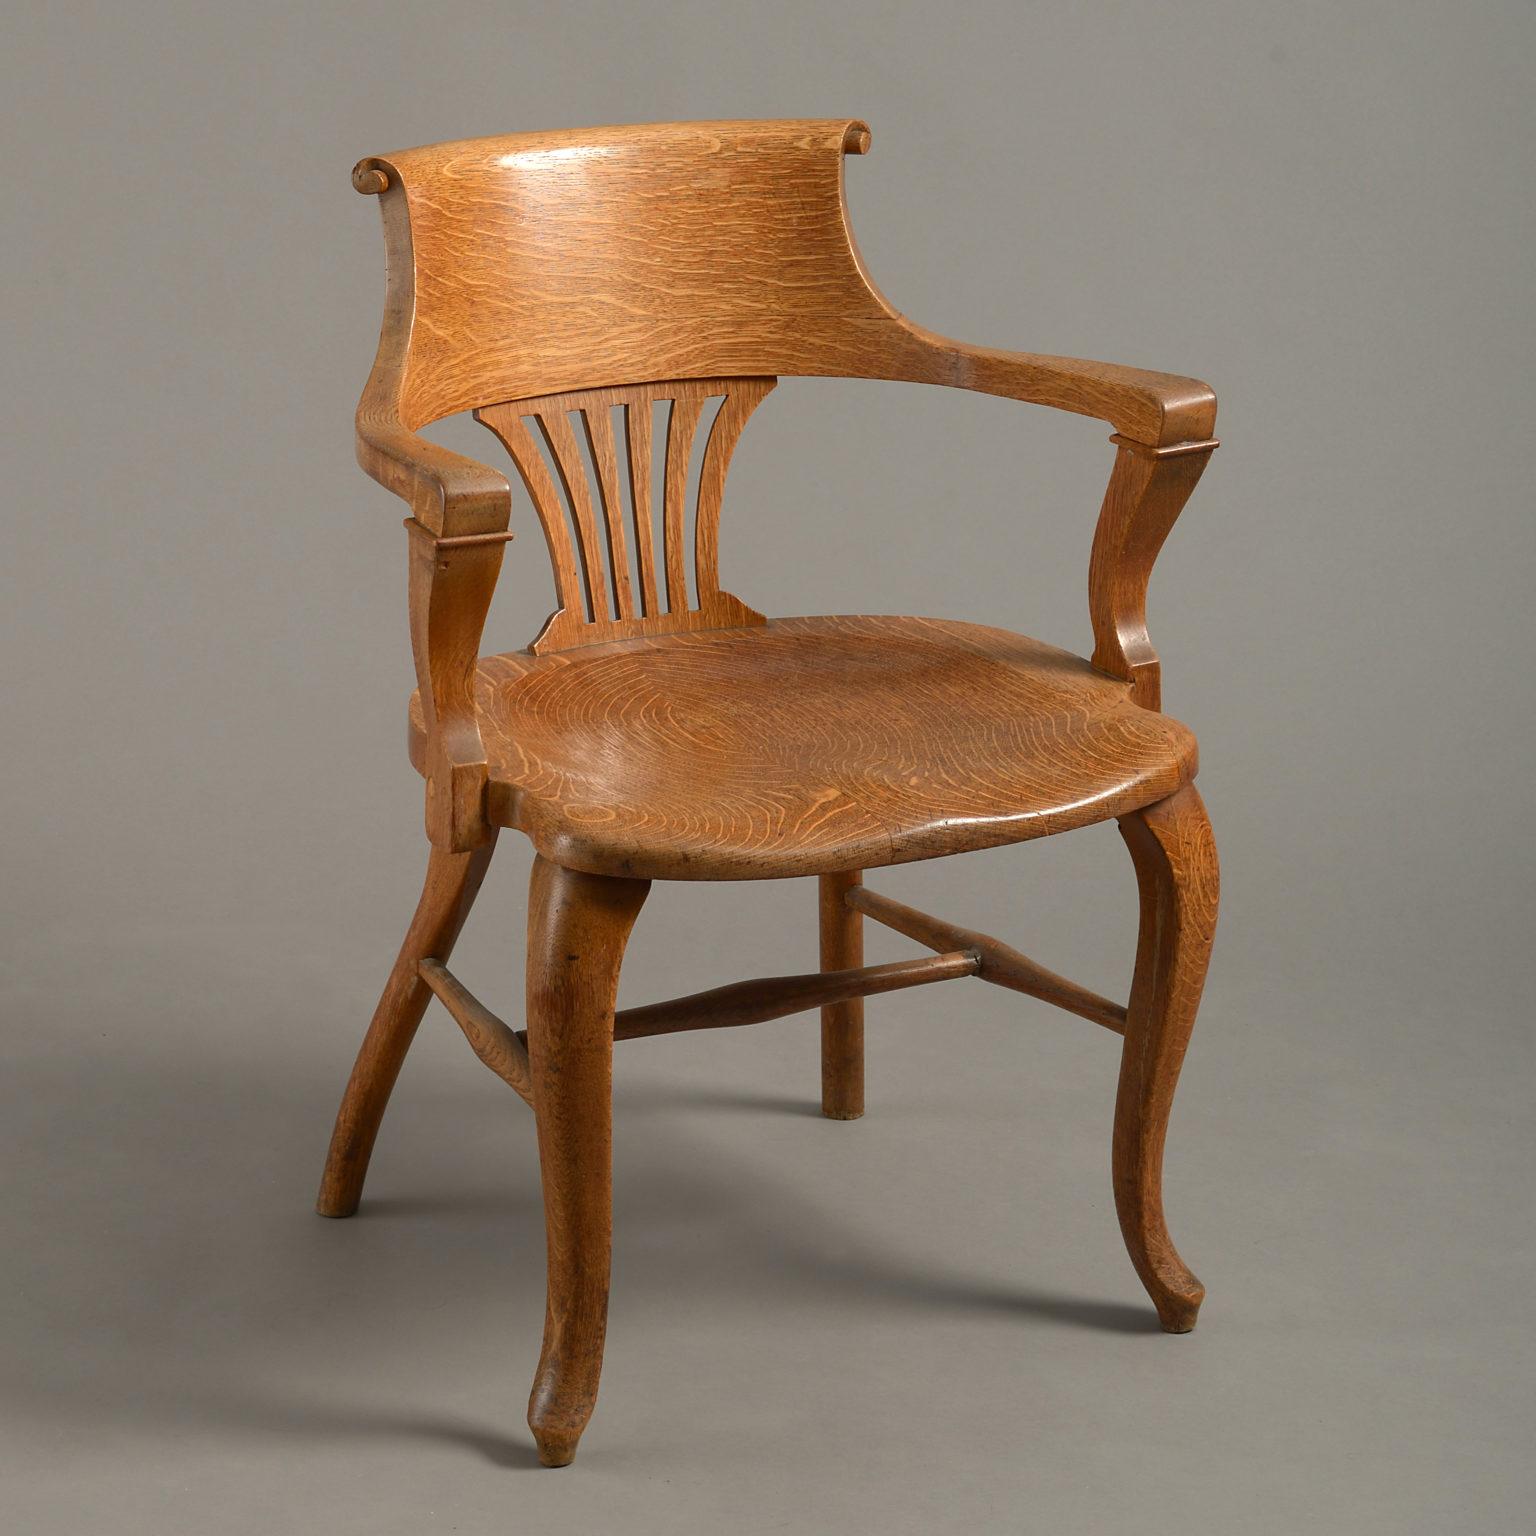 A mid-20th century pair of oak open armchairs, the scrolling back supported by a fluted splat, the finely figured shaped seats raised upon cabriole legs with turned H-form stretchers.

These chairs have been made from the finest oak with rich